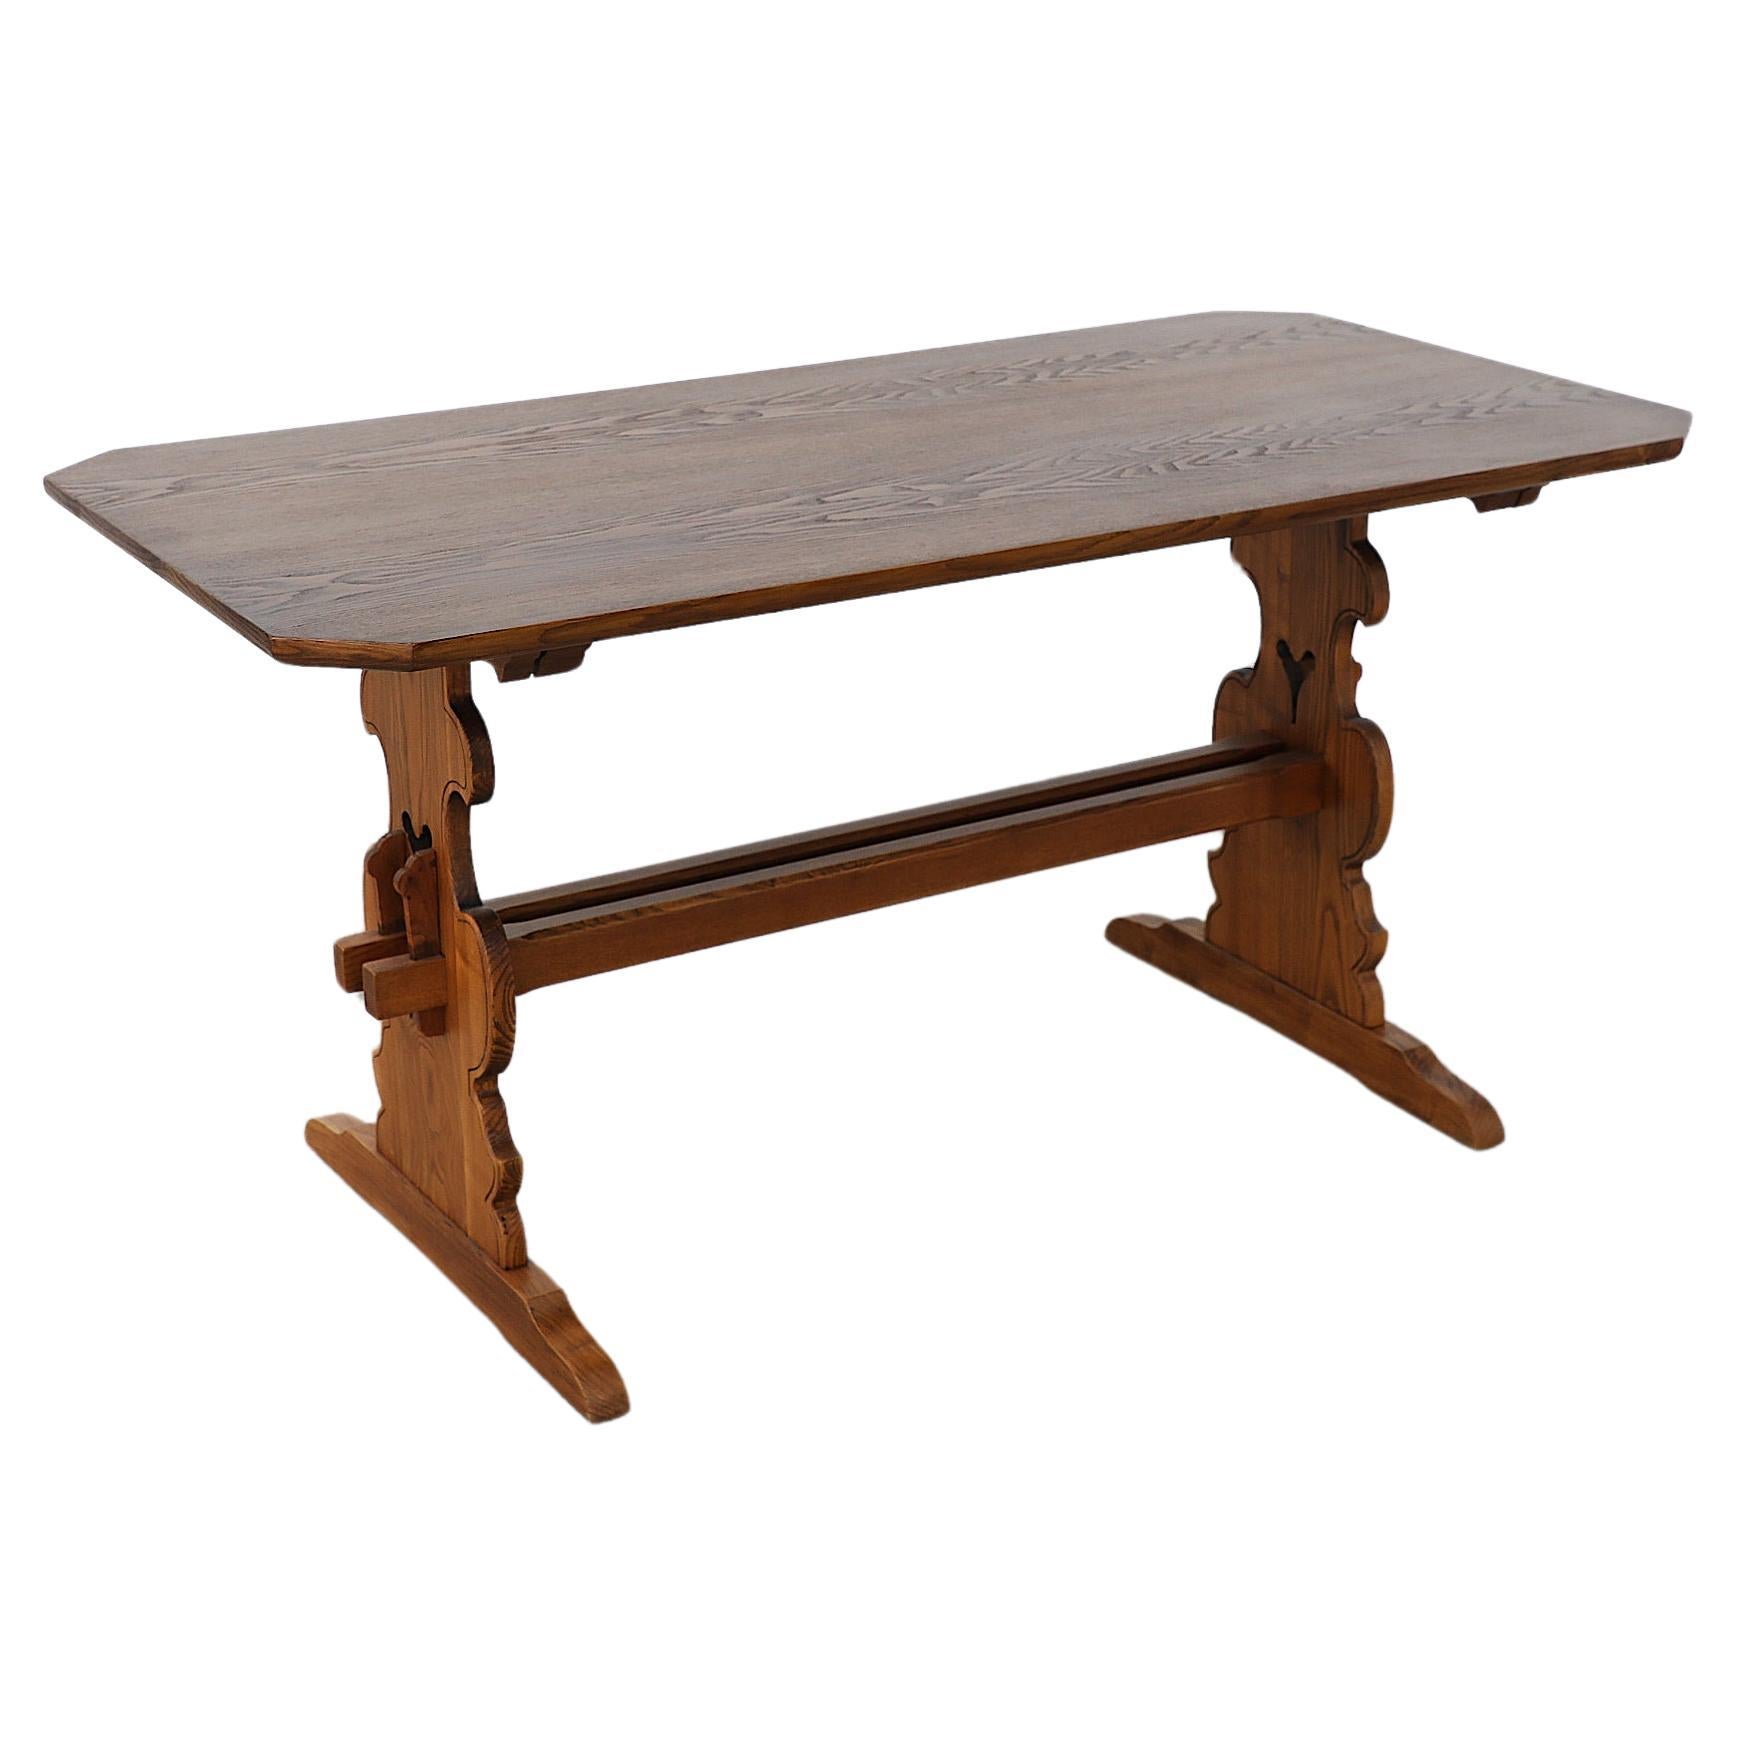 Austrian Ornate Brutalist Tyrolean Style Dark Pine Table with Angled Corners